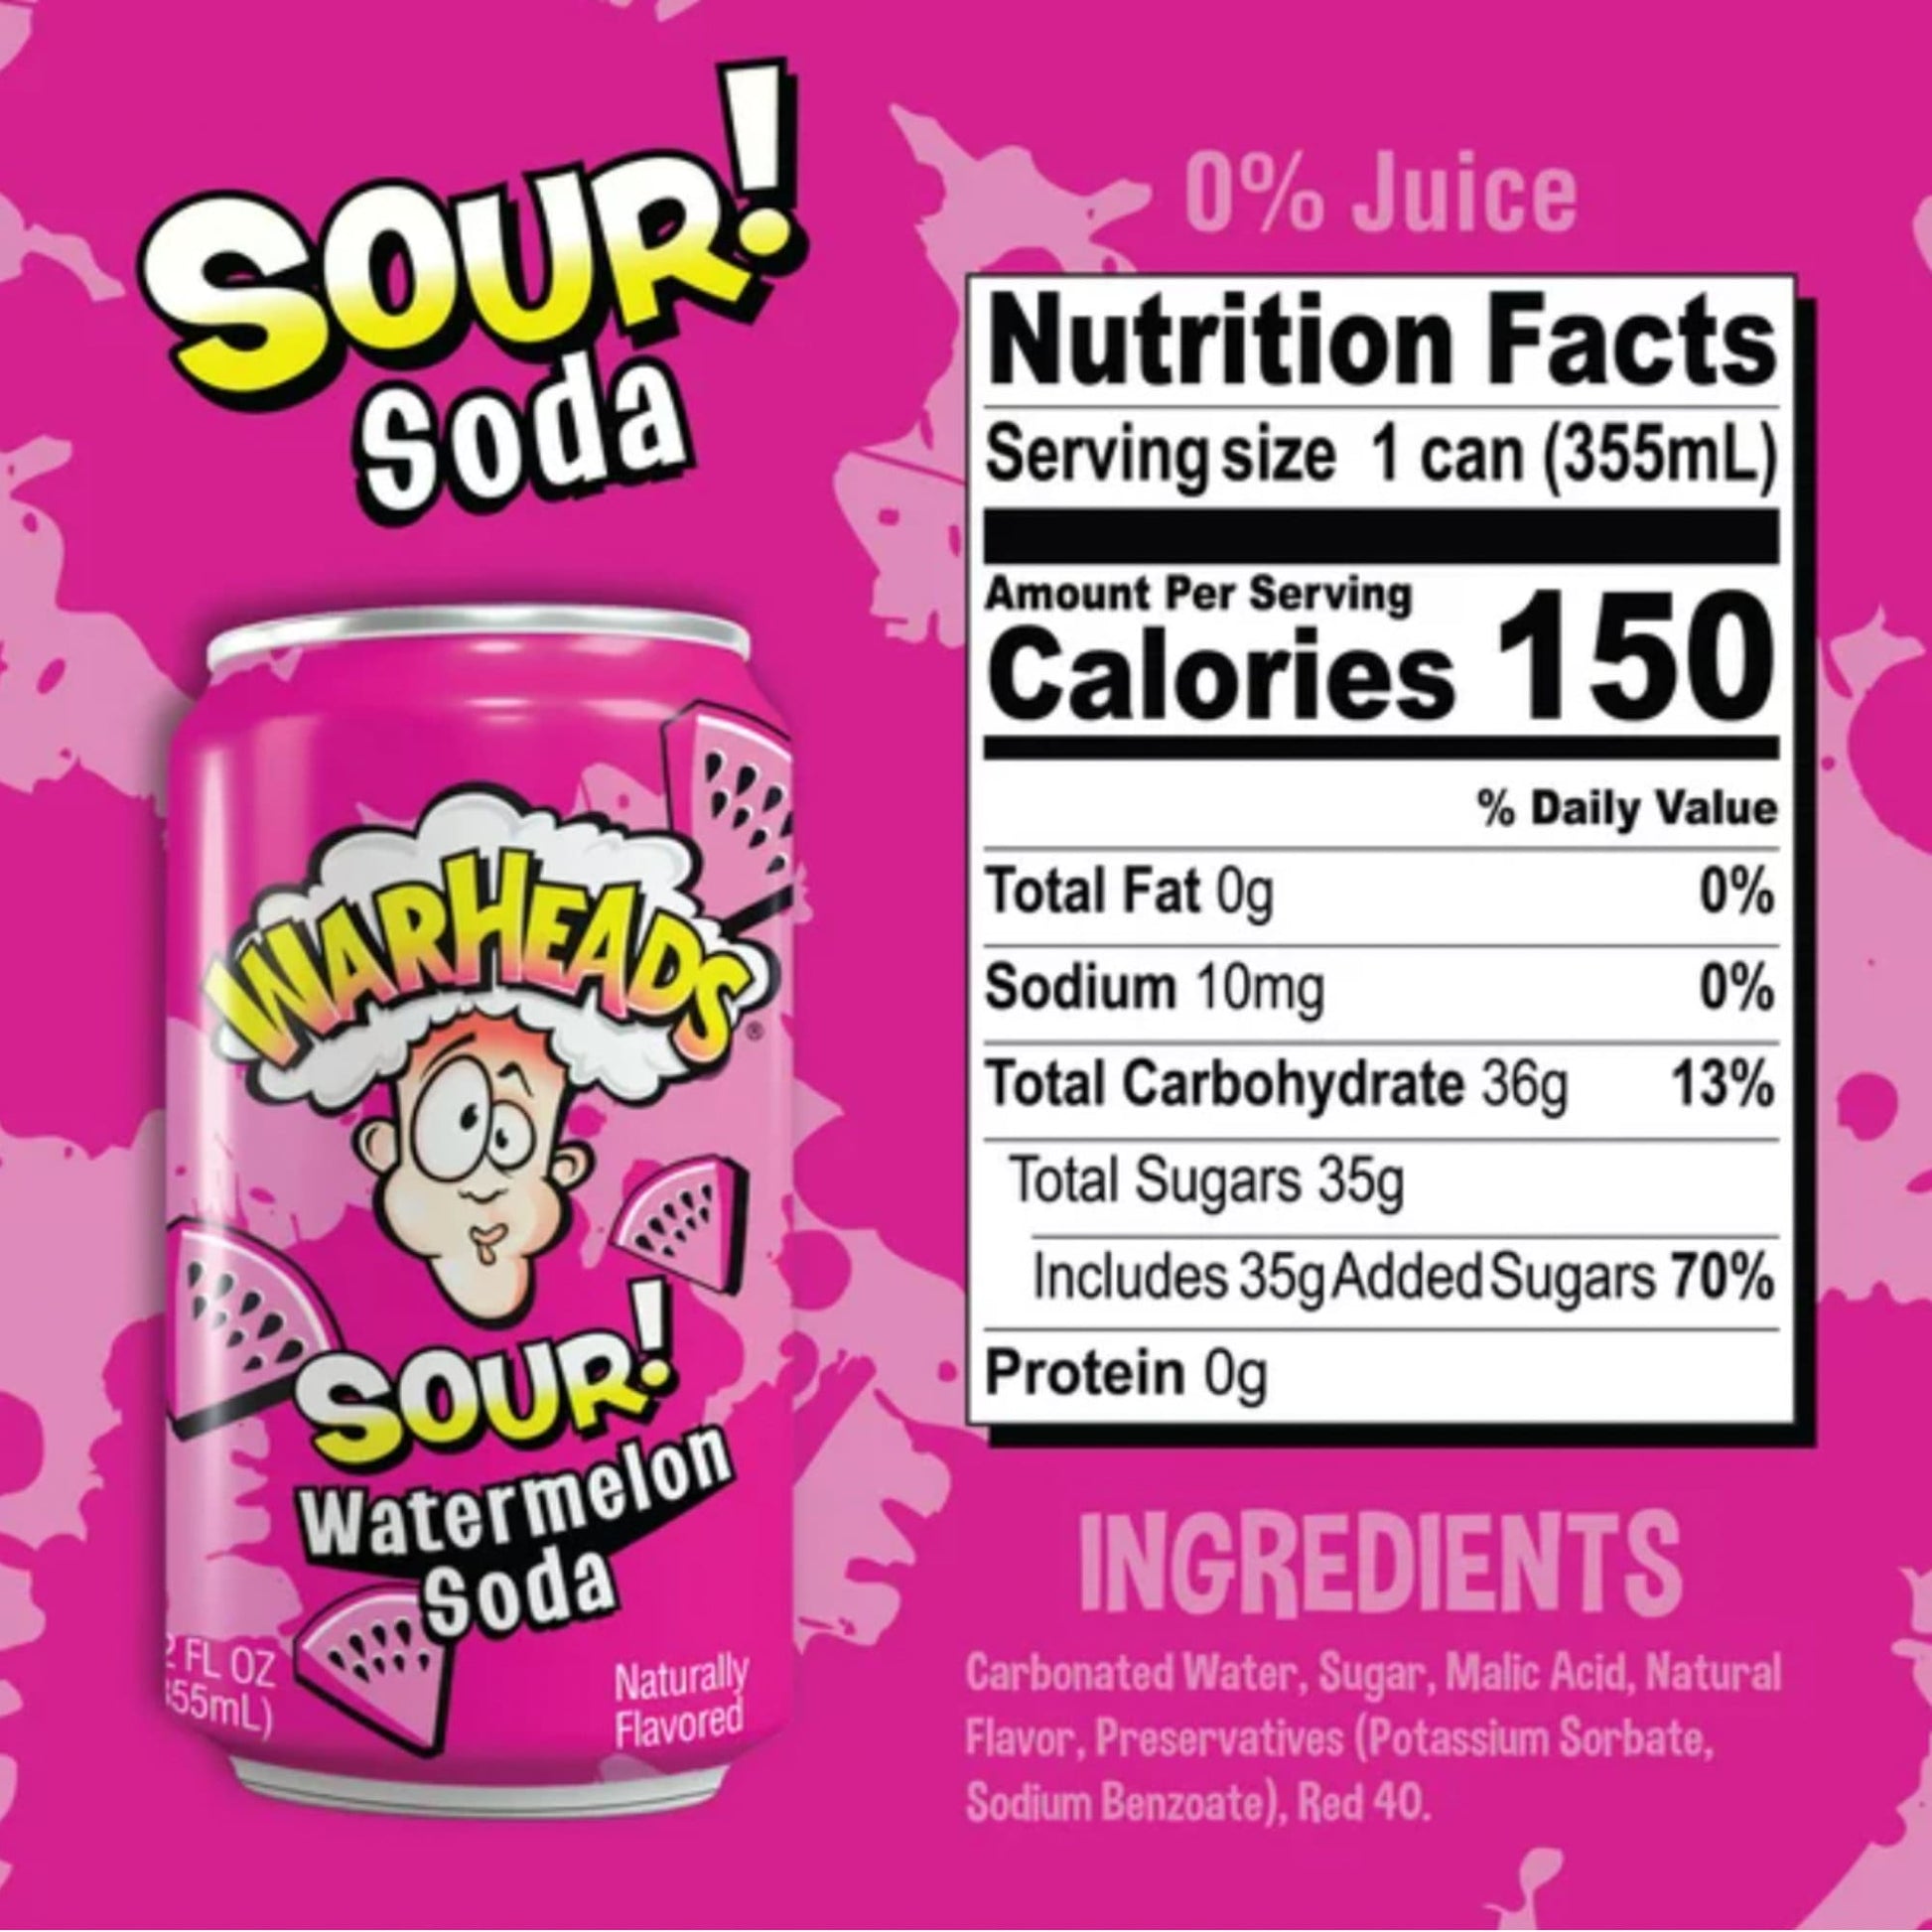 Sour Watermelon Warheads Soda - Nutrition Facts and Ingredients